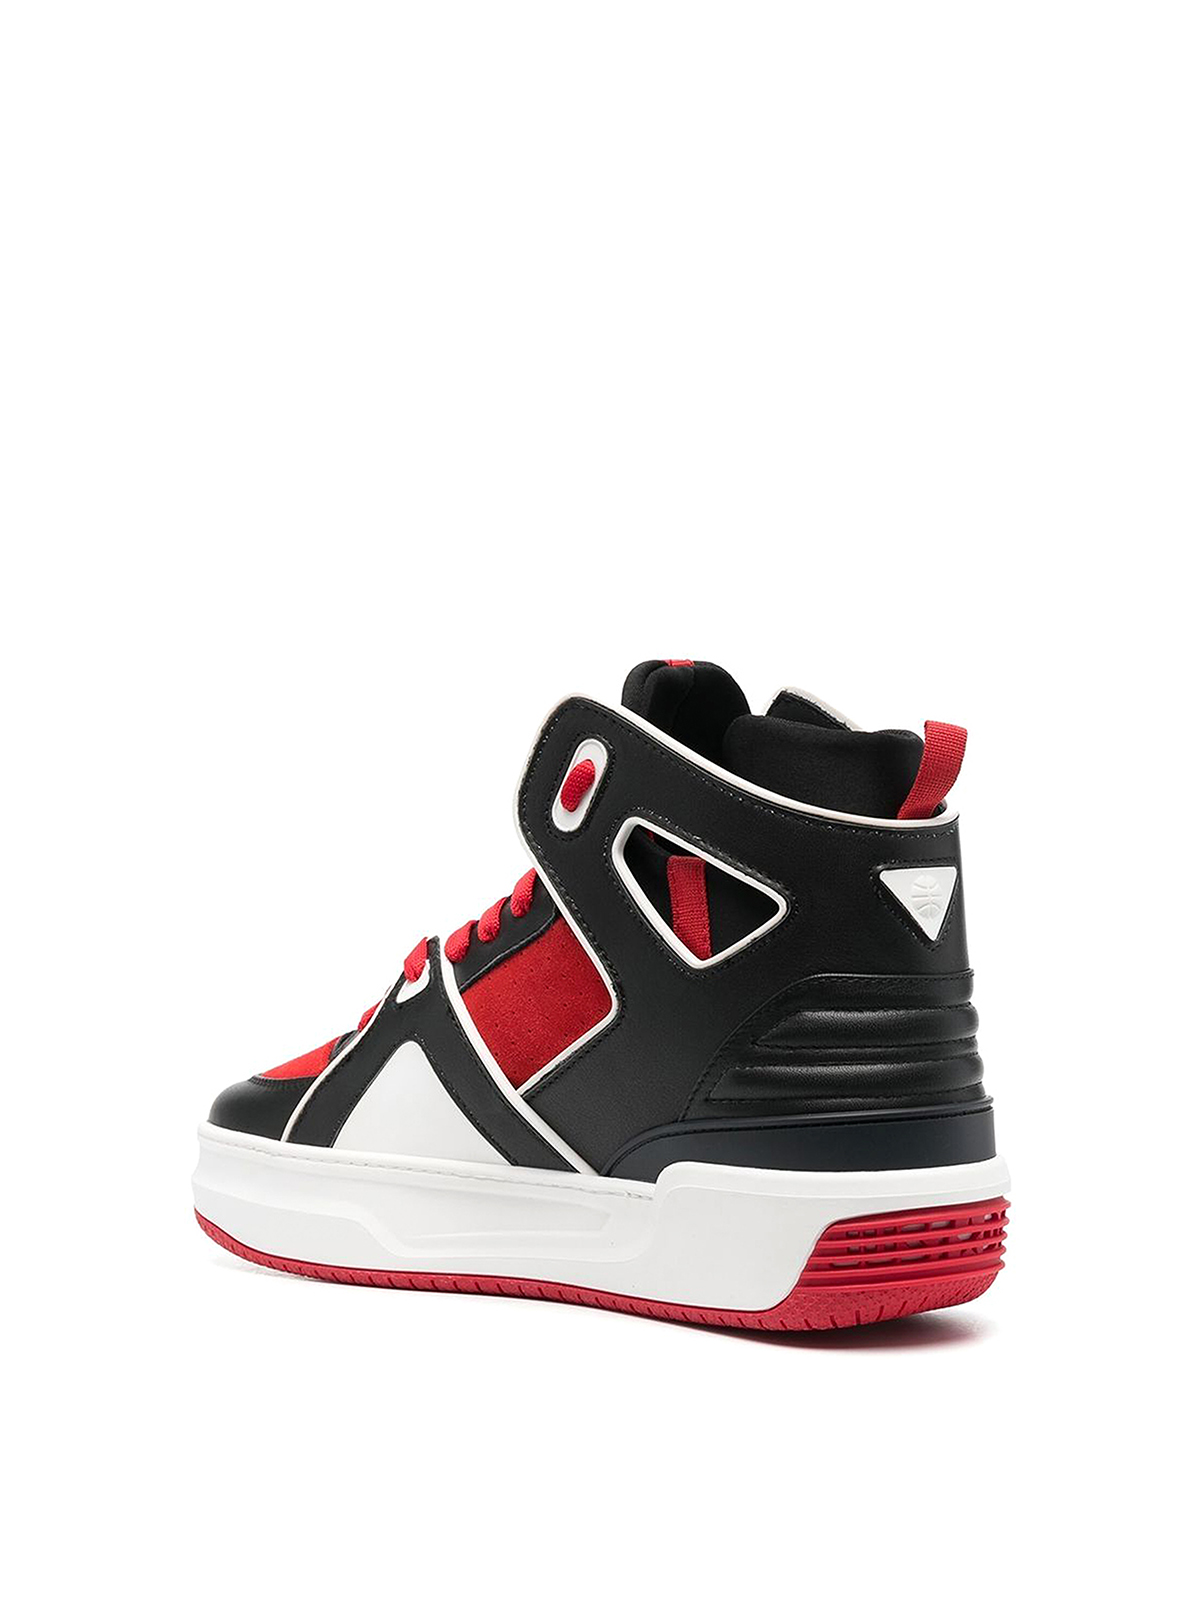 Shop Just Don Basketball Courtside High-top Sneakers In Negro